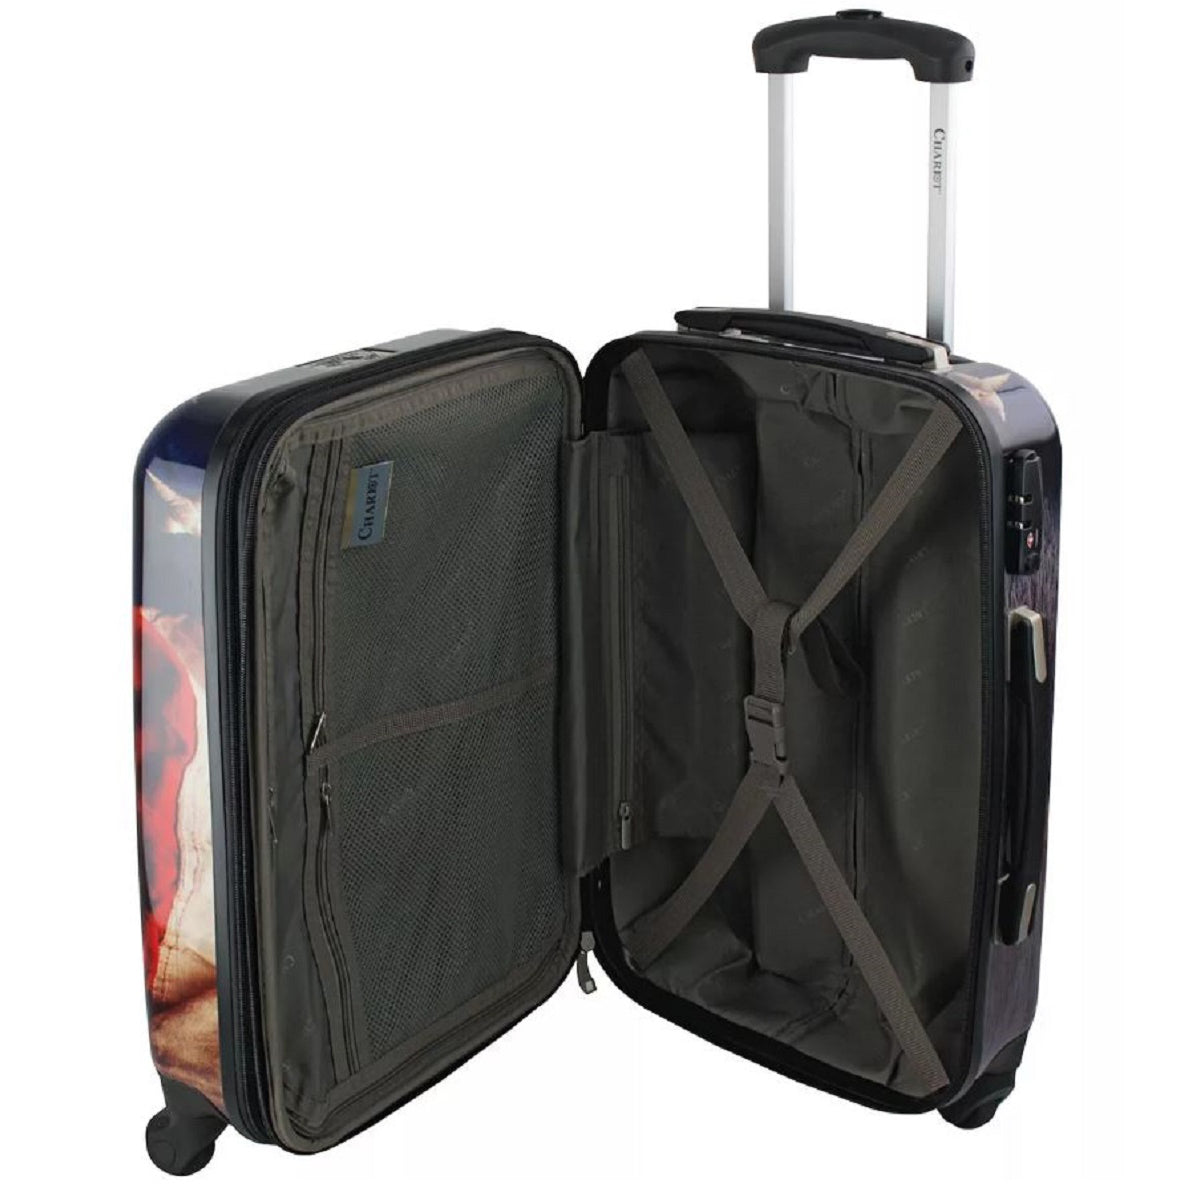 Chariot Freedom Pups 3-Piece Hardside Expandable Spinner Luggage Set